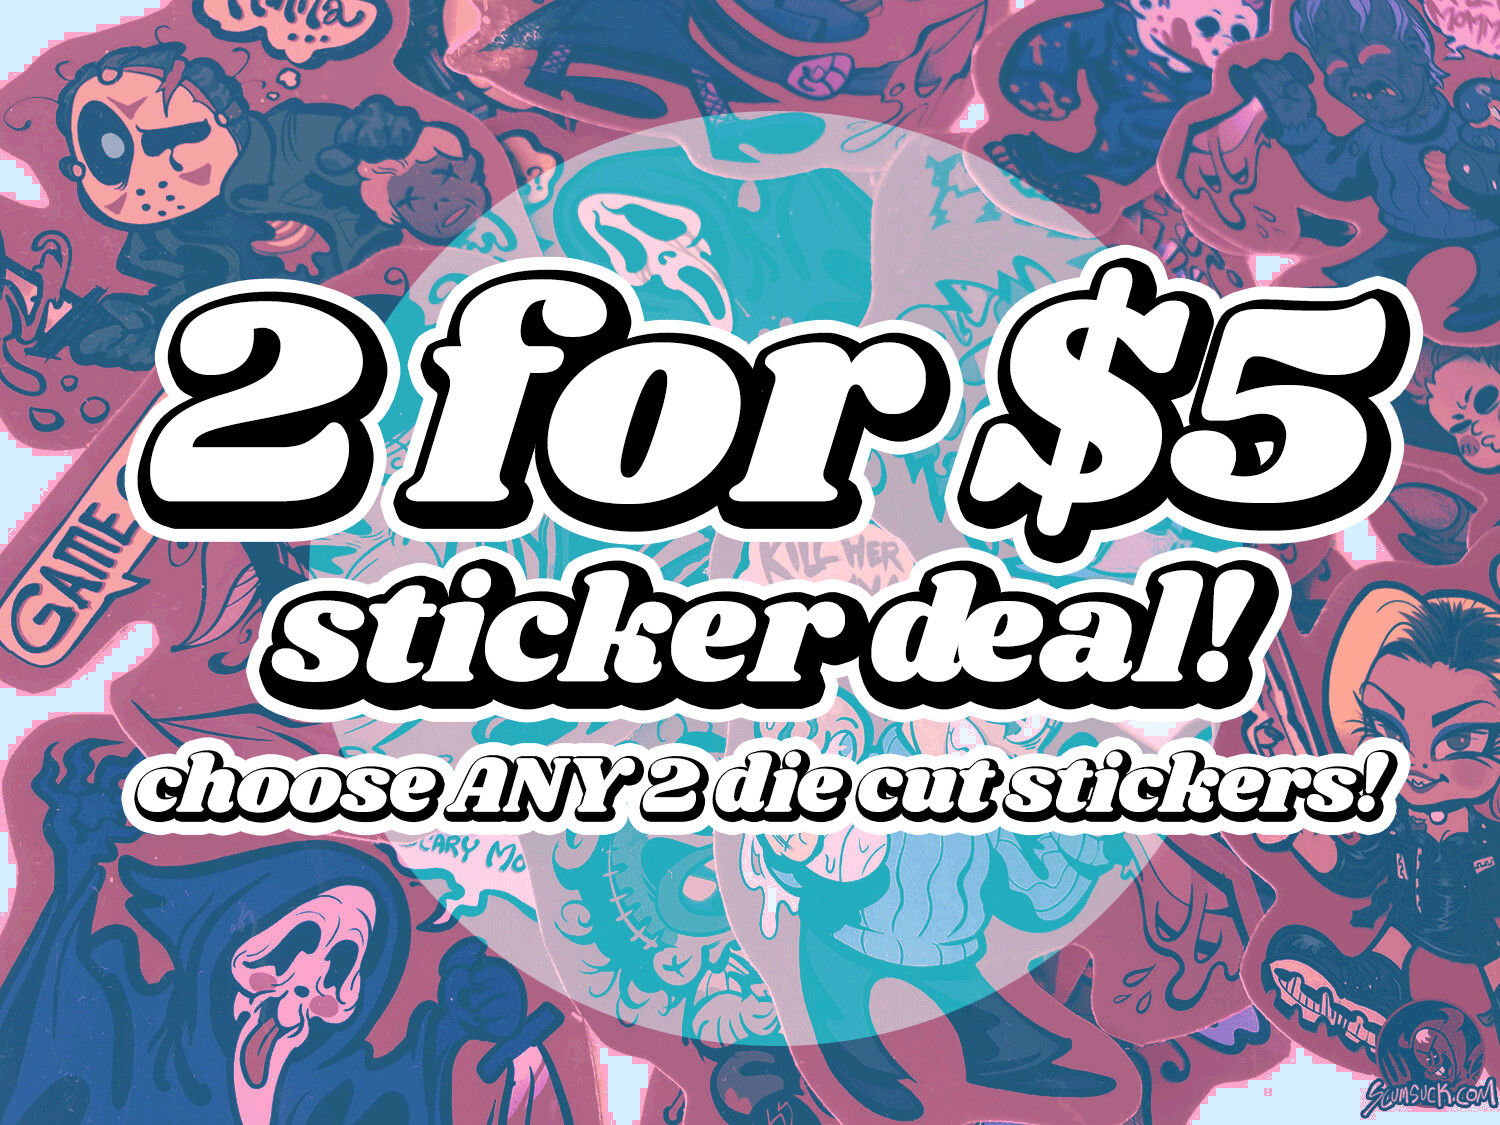 Mix n' Match! 2 Stickers for $5